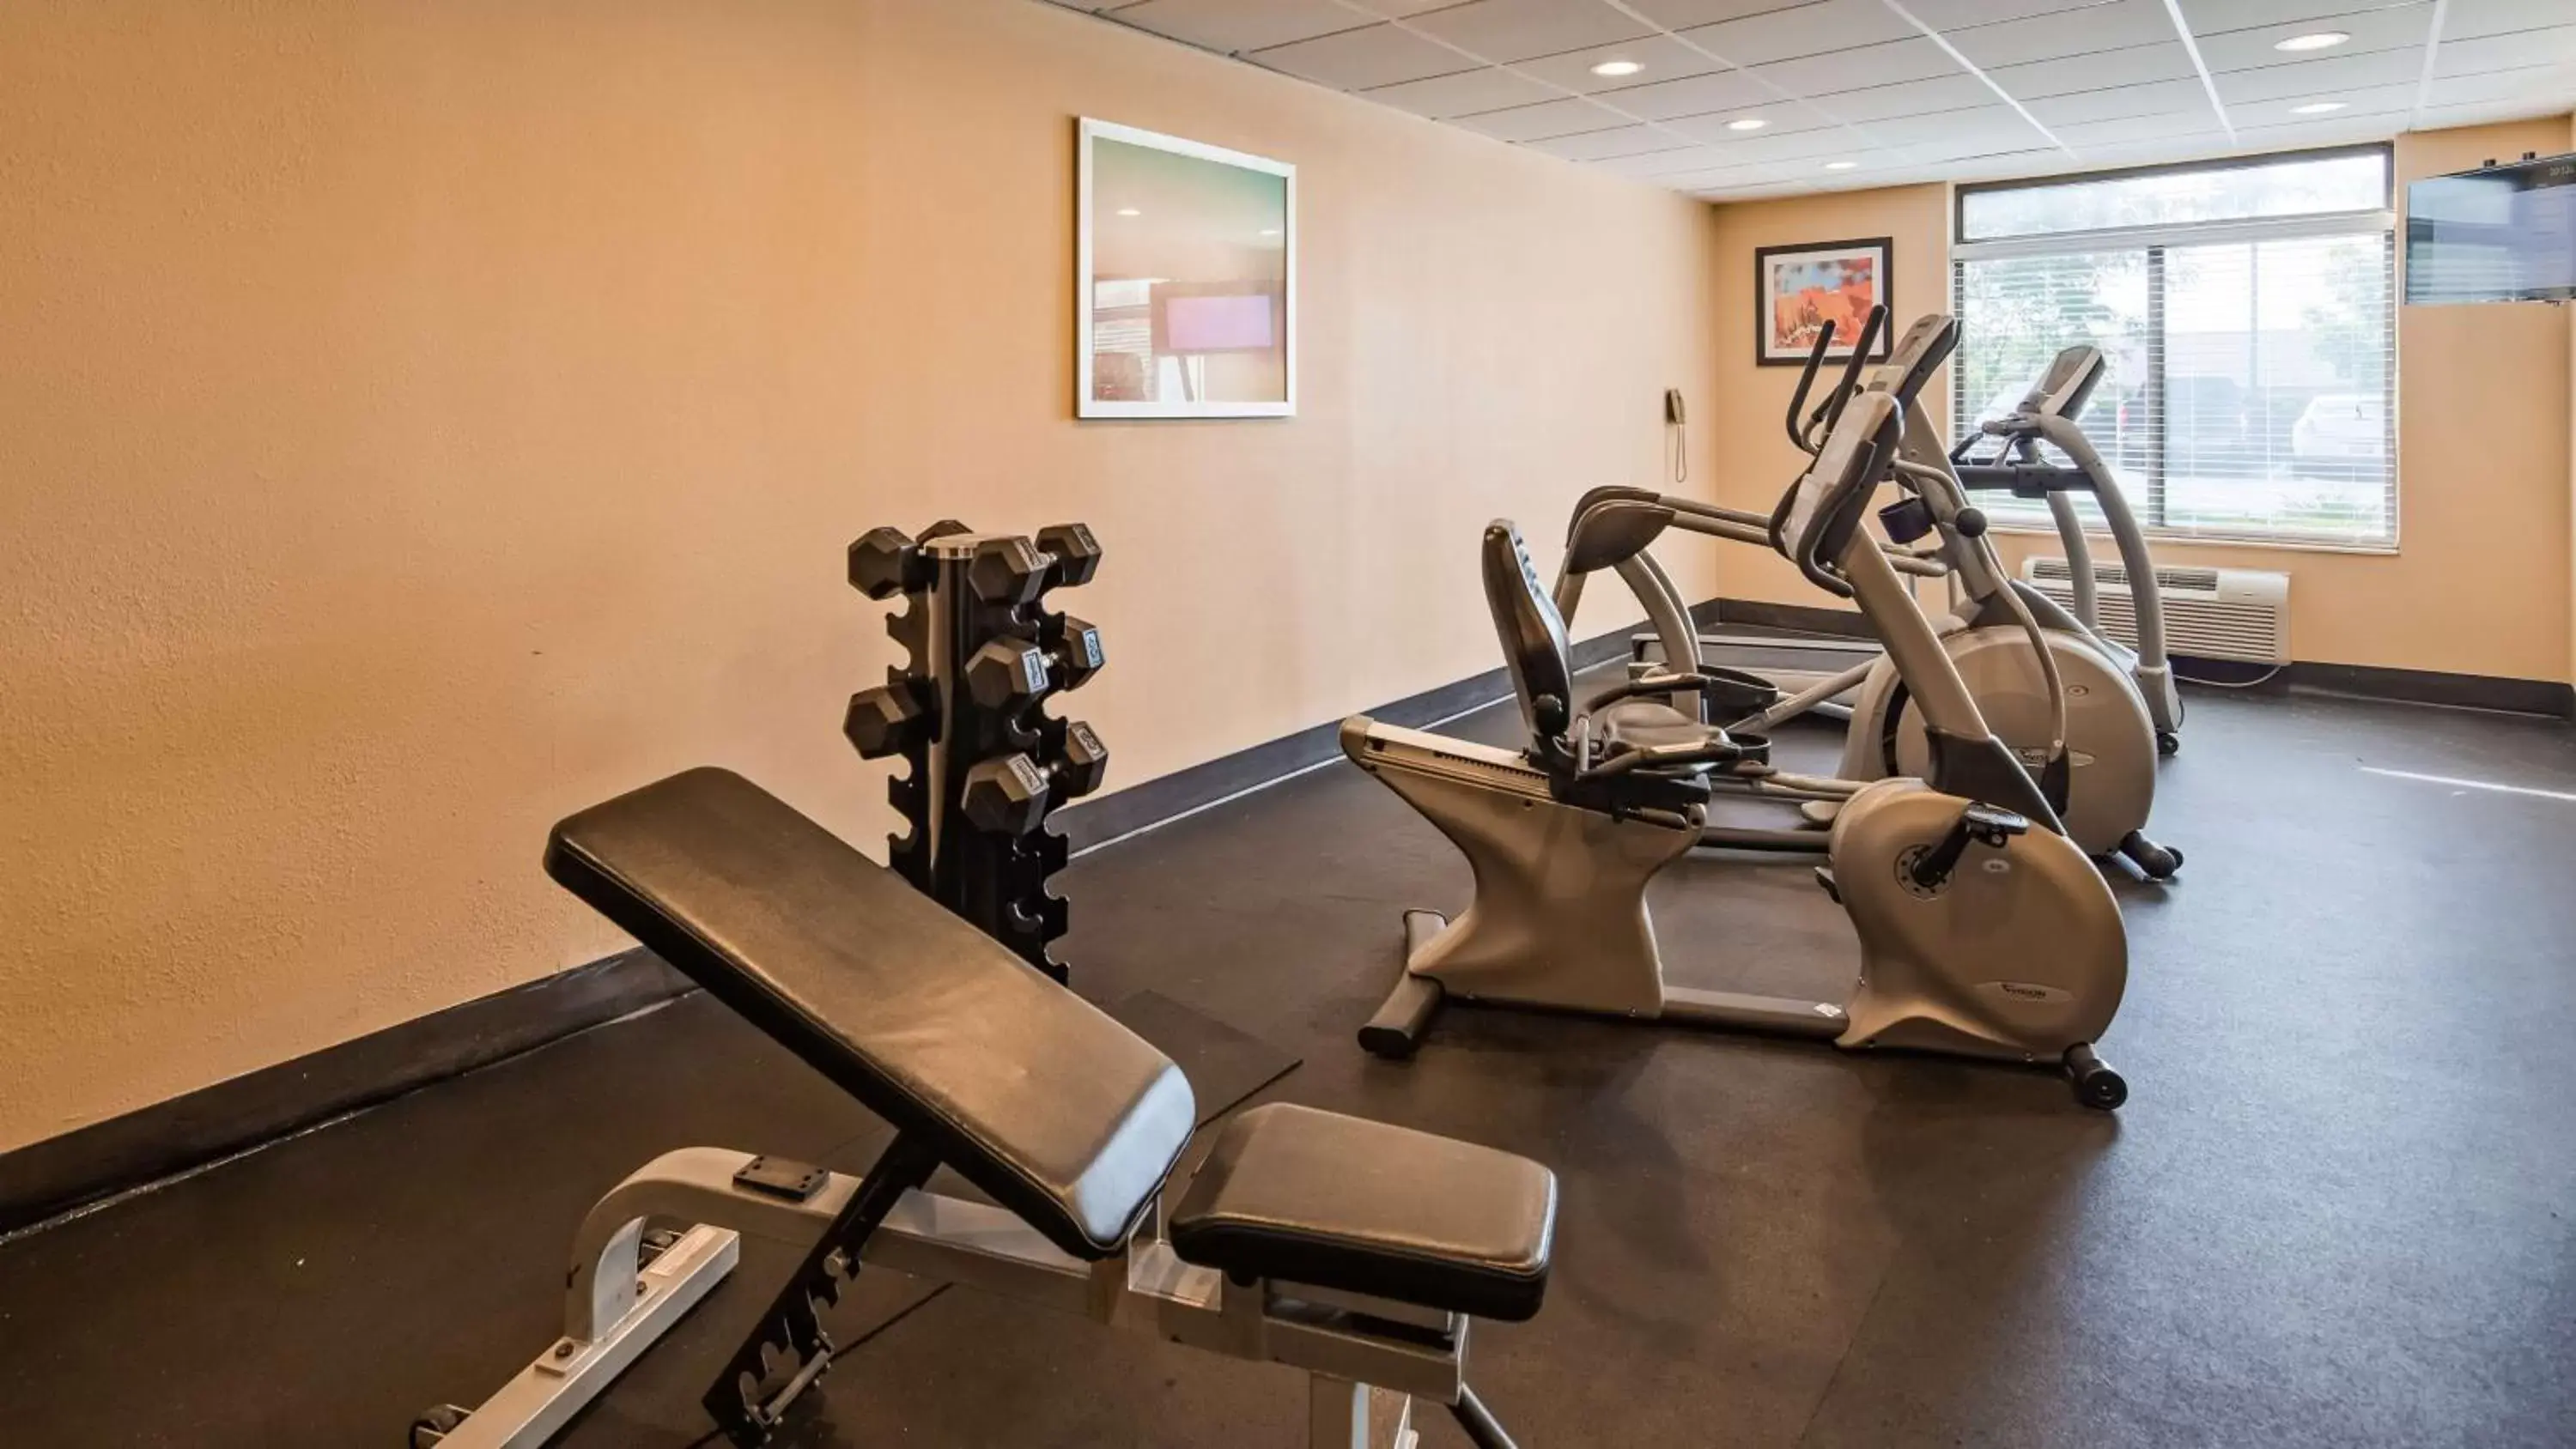 Fitness centre/facilities, Fitness Center/Facilities in Best Western Plus Harrisburg East Inn & Suites